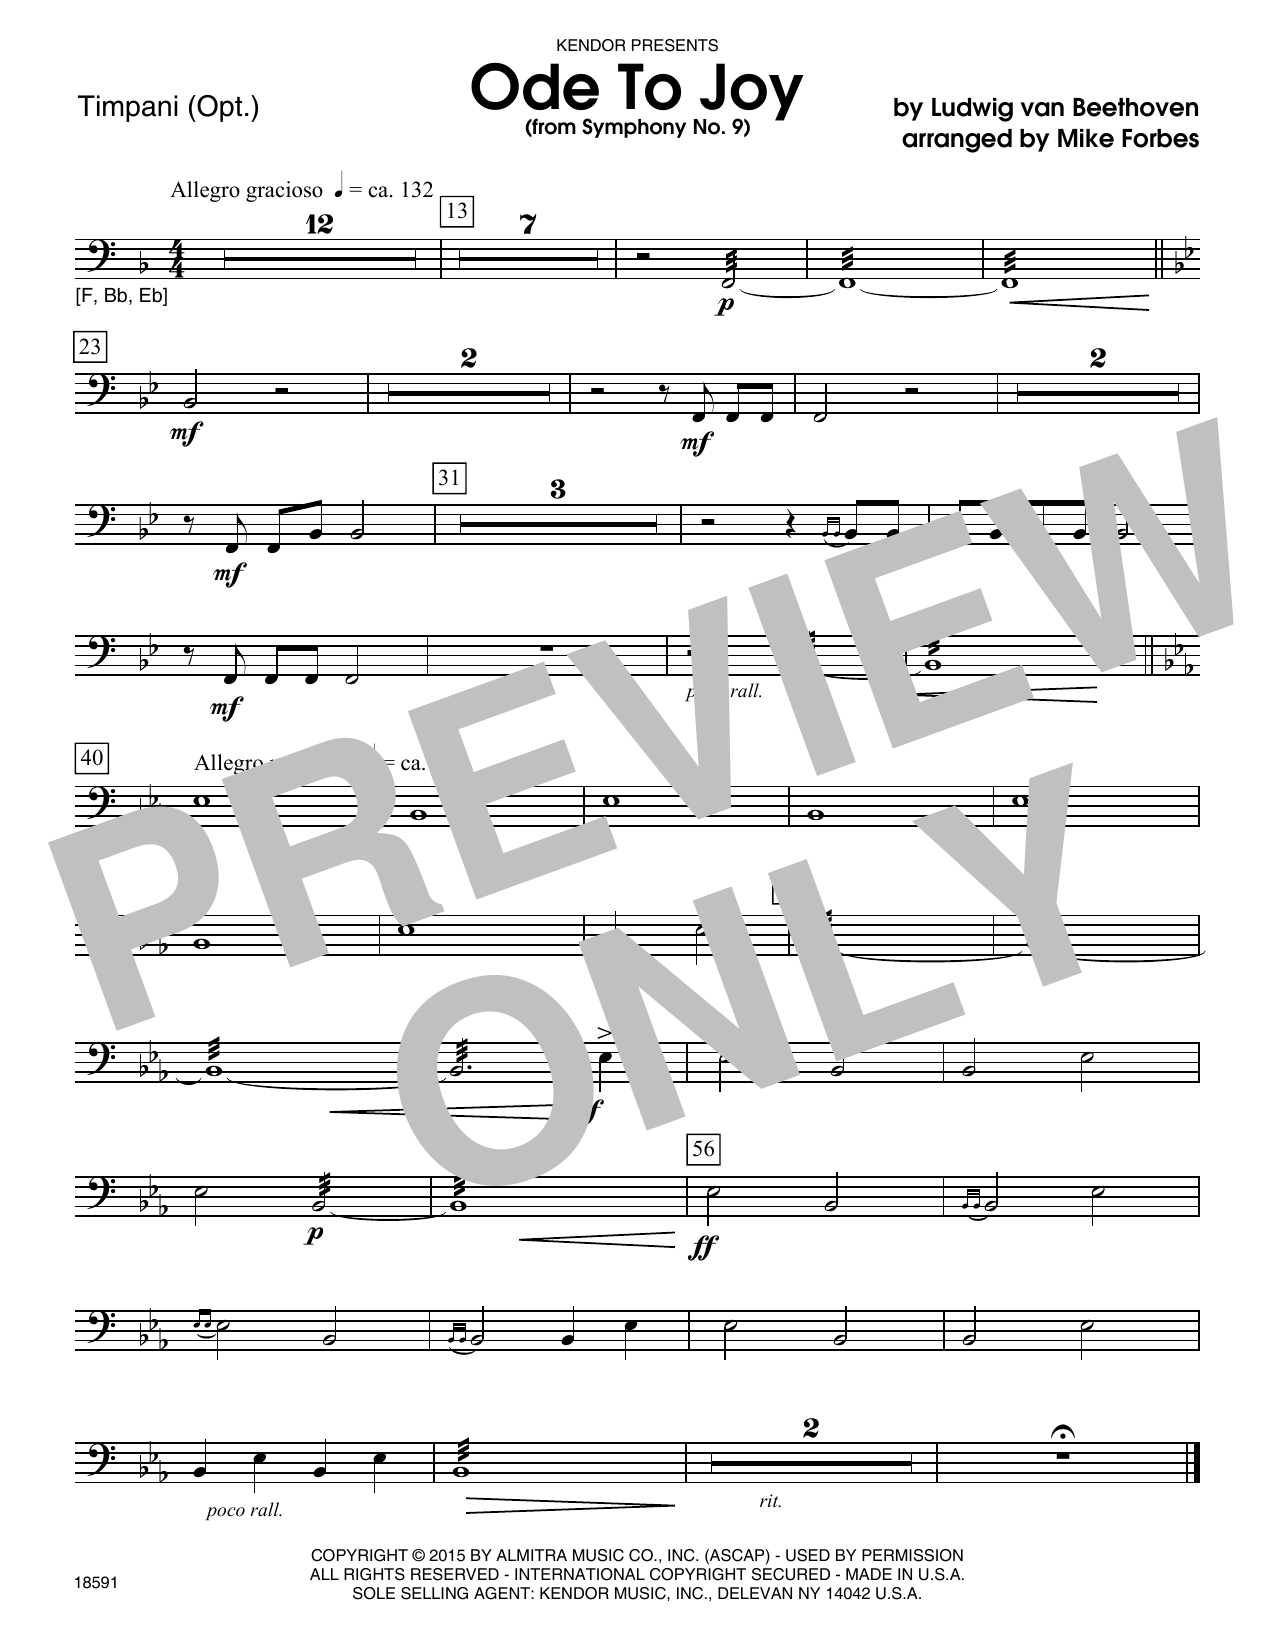 Download Mike Forbes Ode To Joy (from Symphony No. 9) - Timp Sheet Music